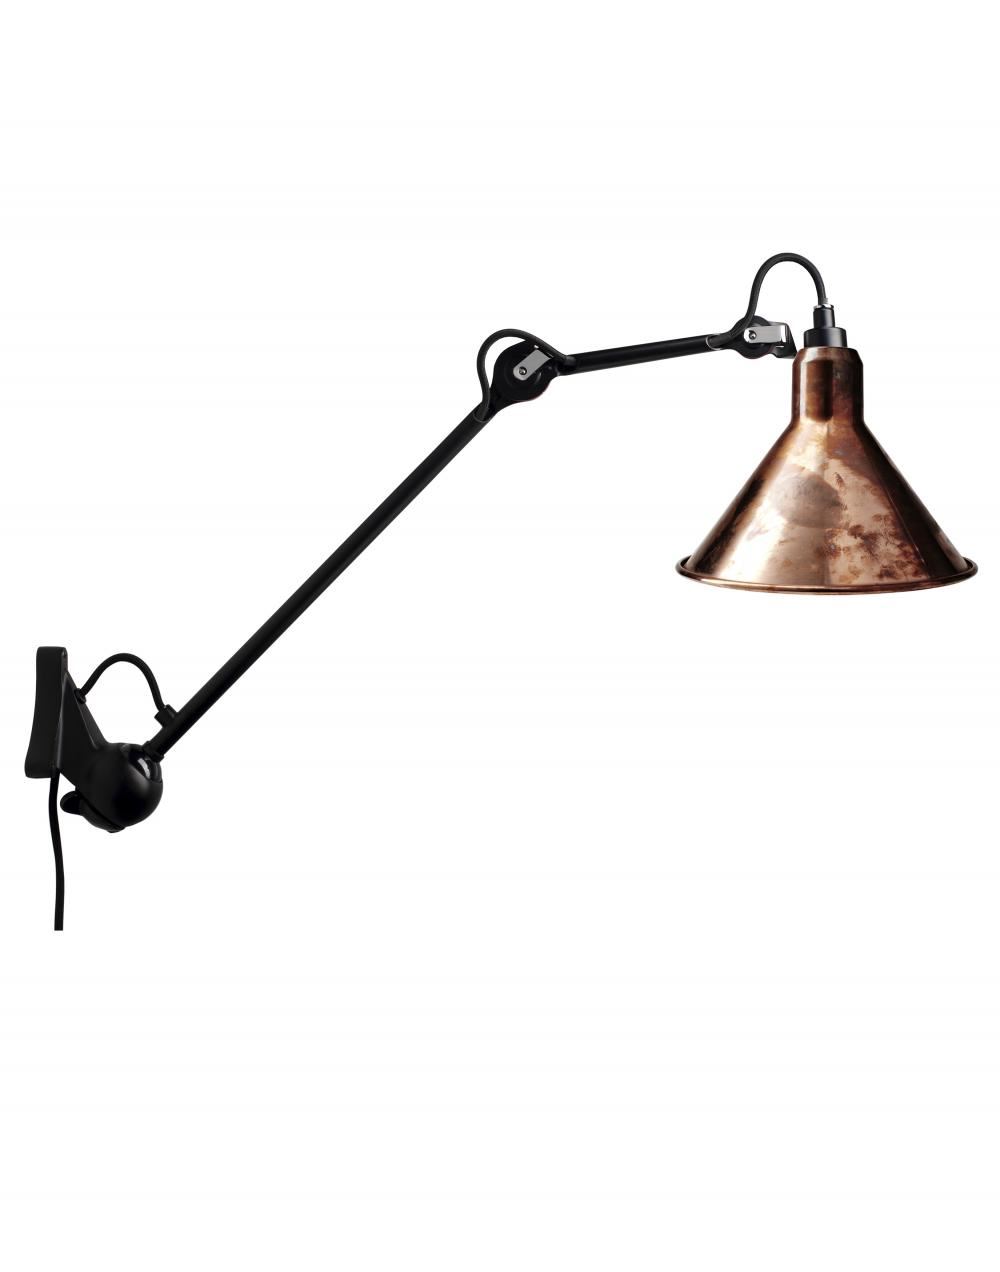 Lampe Gras 222 Wall Light Black Arm Raw Copper Shade Conic Shade